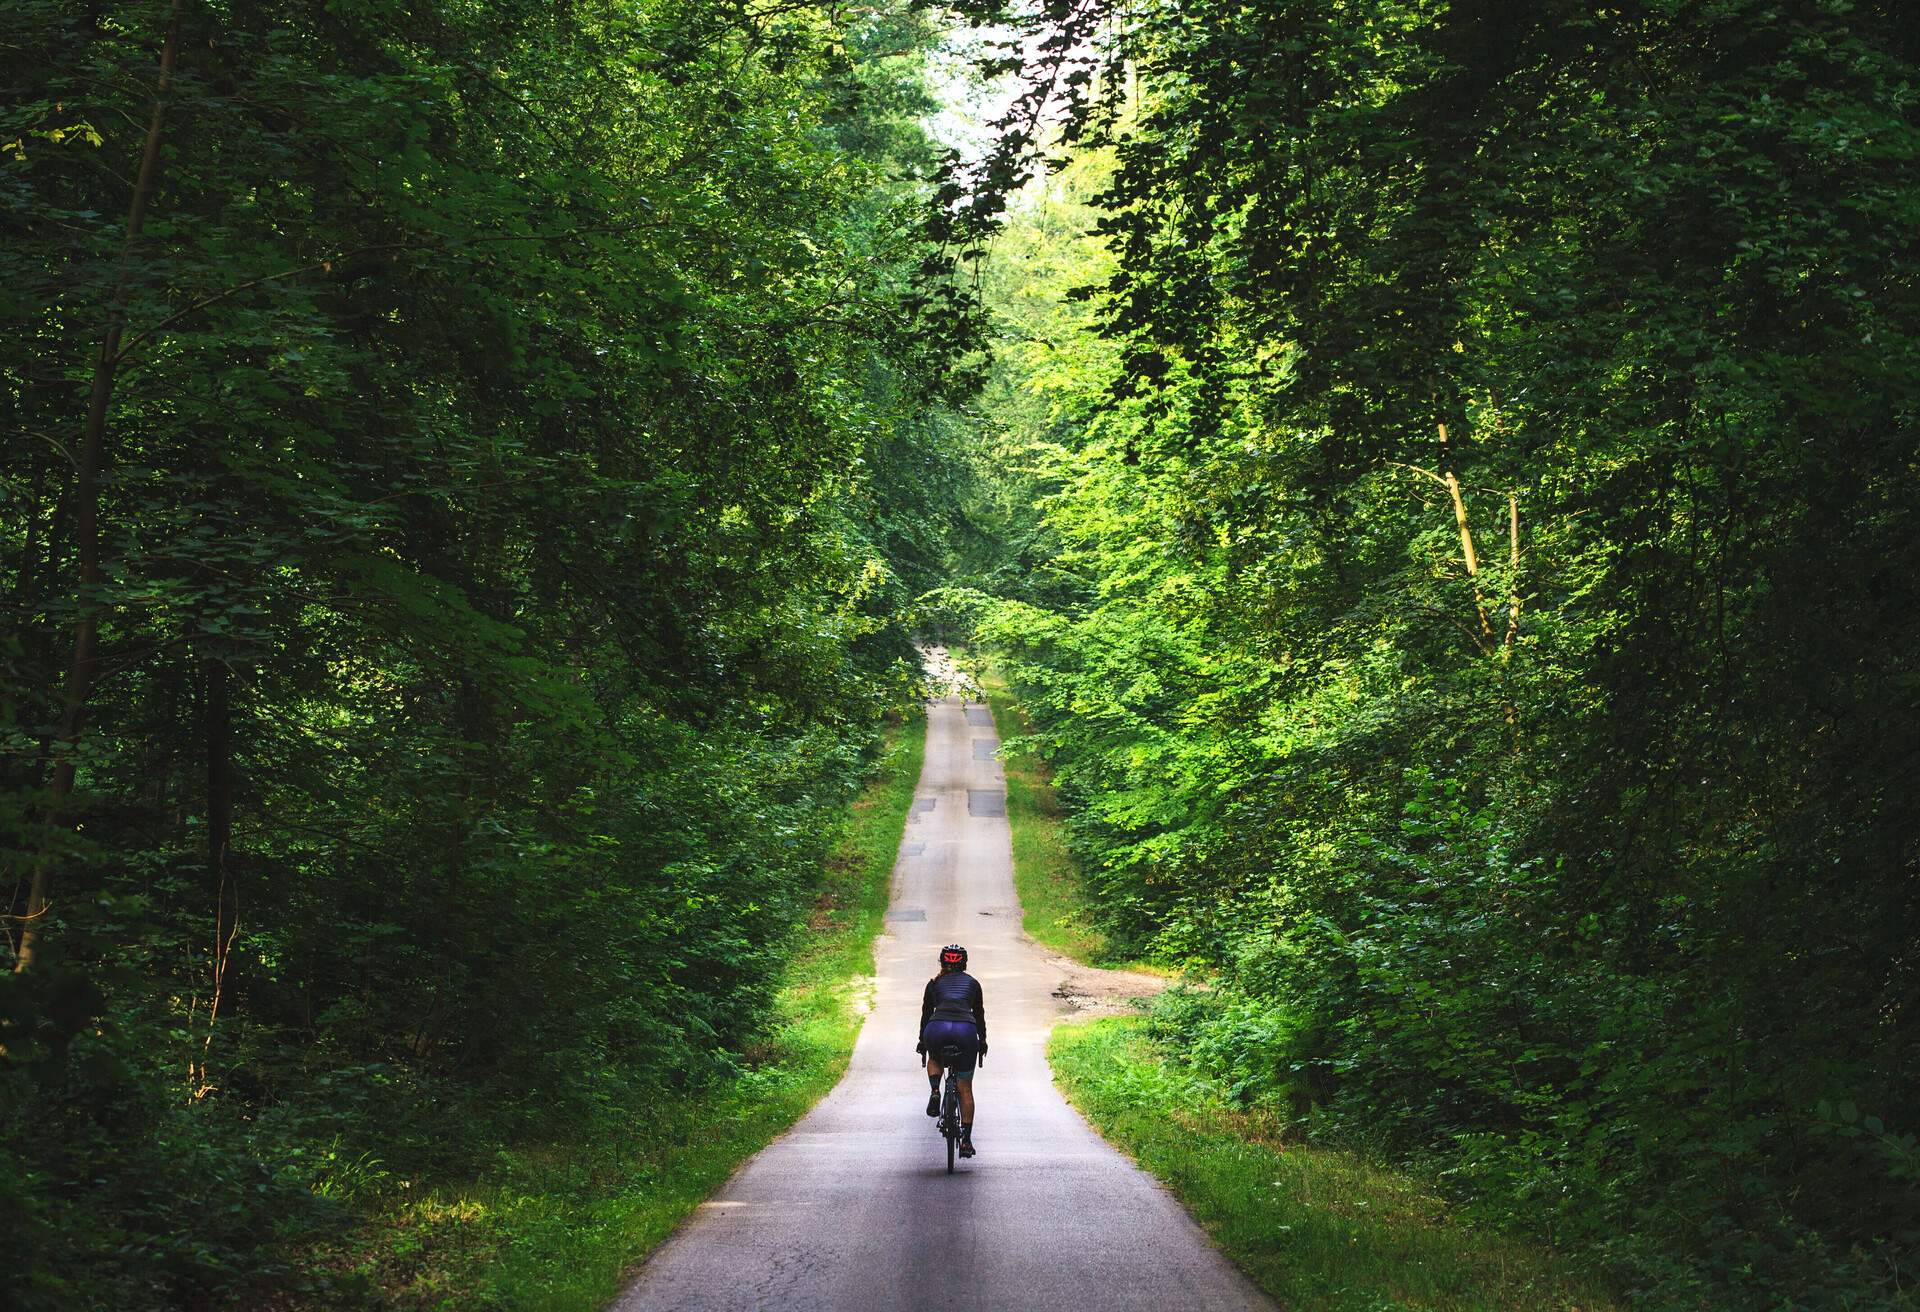 A female cyclist rides through the lush, tall trees of the Eawy Forest, in North-western Normandy, France.